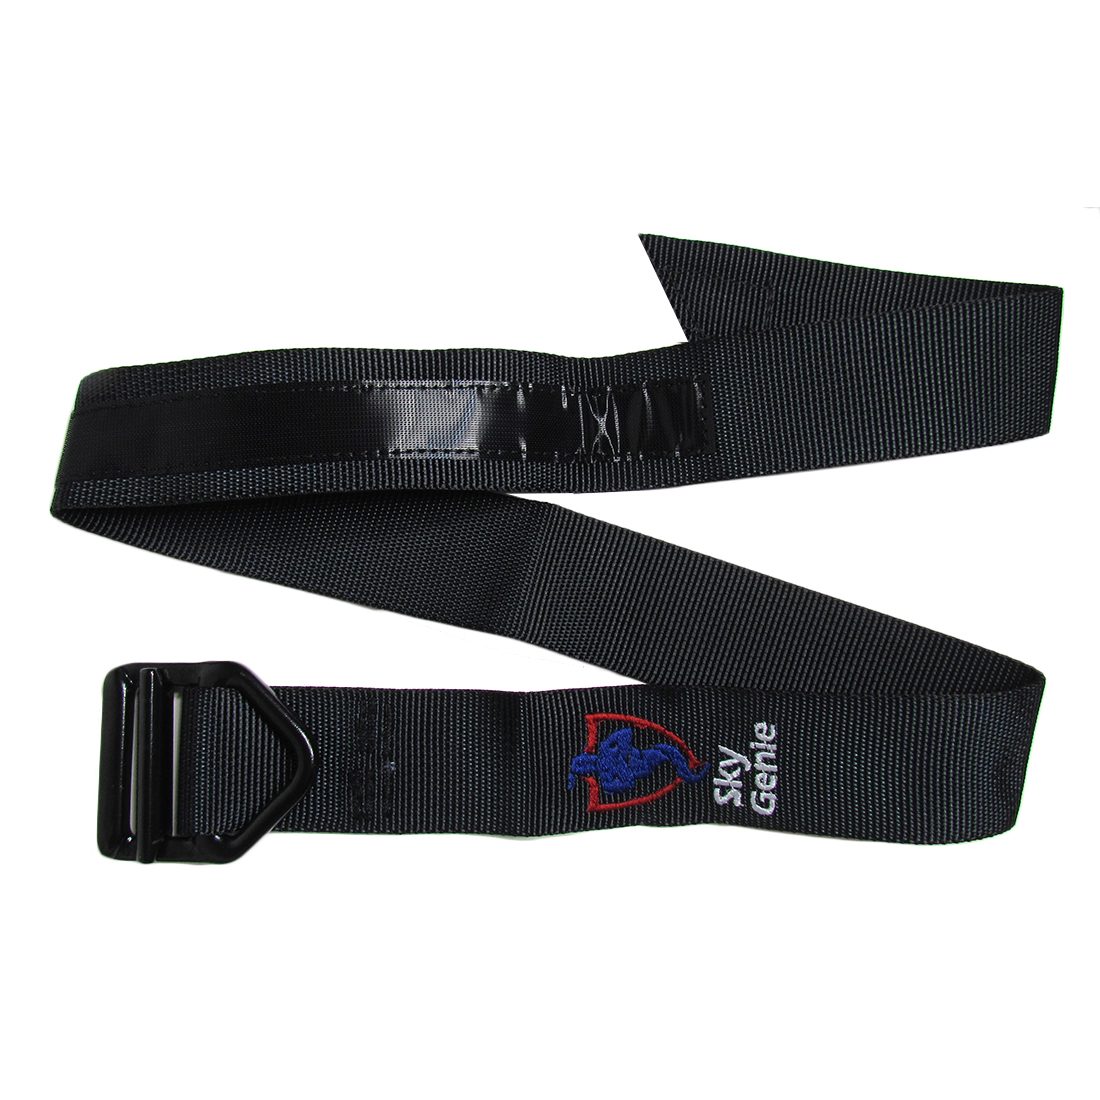 Sky Genie Riggers Belt - Front View